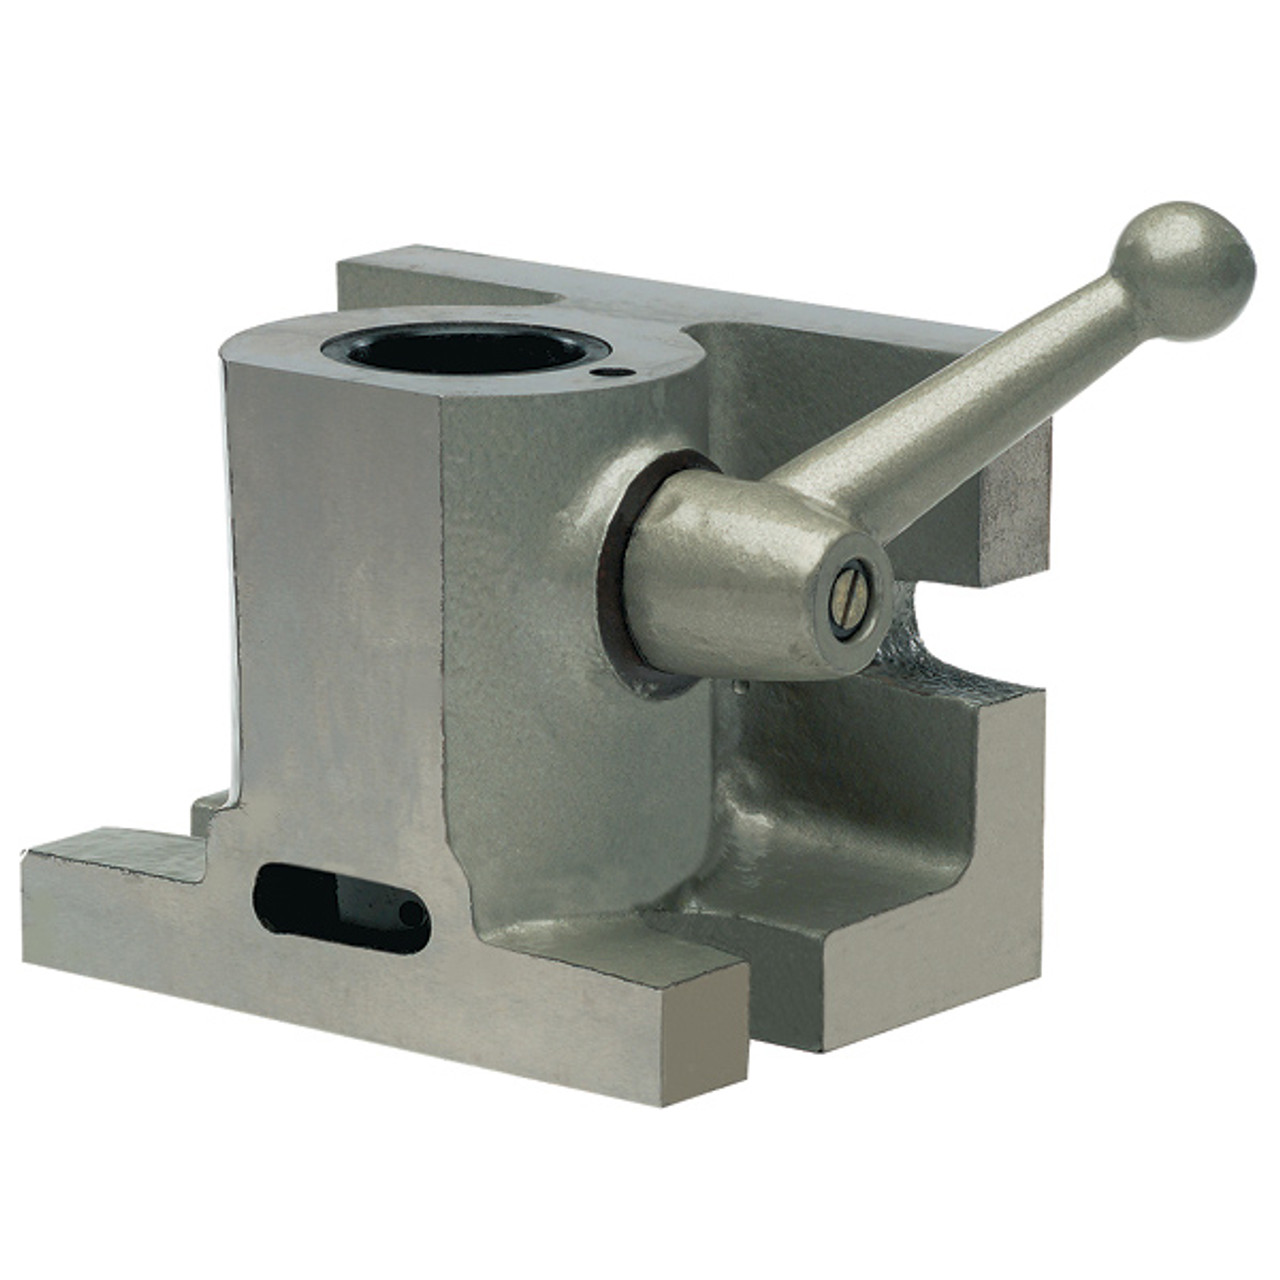 69-002-003      CAM LEVER 5C H/V COLLETFIXTURE - PHASE II